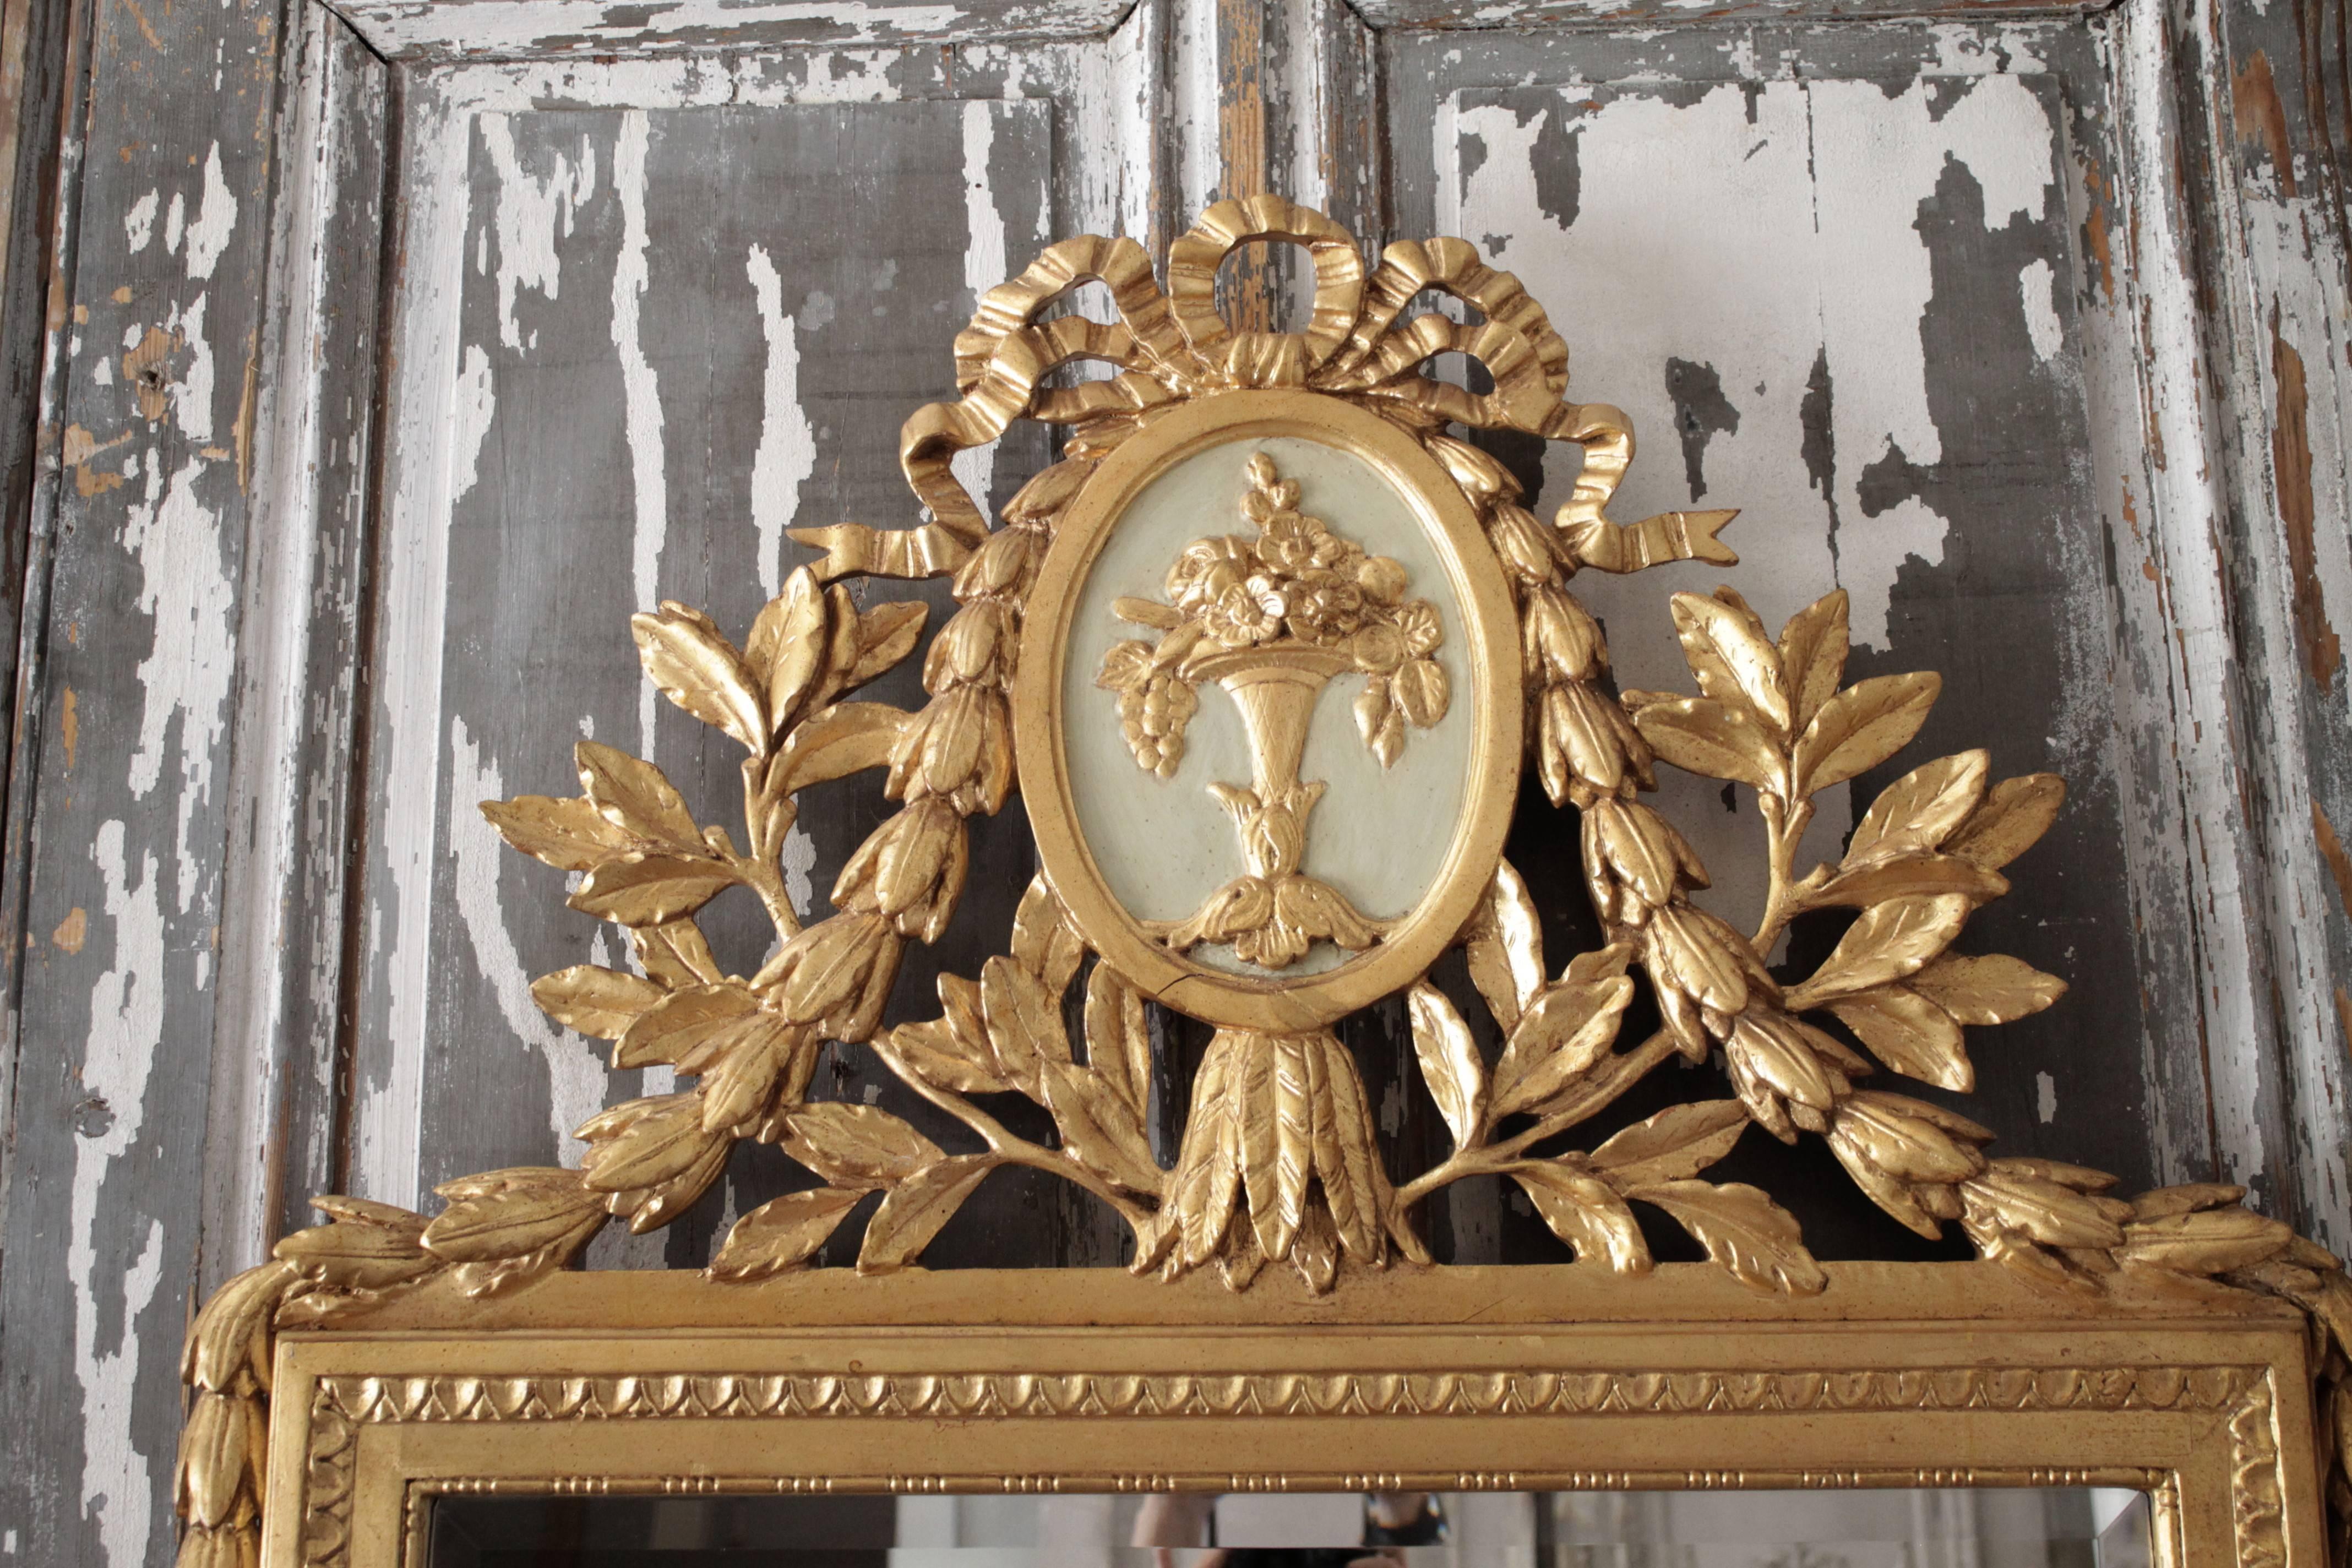 Elegant carved giltwood mirror with decorative elements typical of that period and style include an urn with fruits, flowers and leaves, as well as ribbons and pearls. Original beveled mirror has some aging.